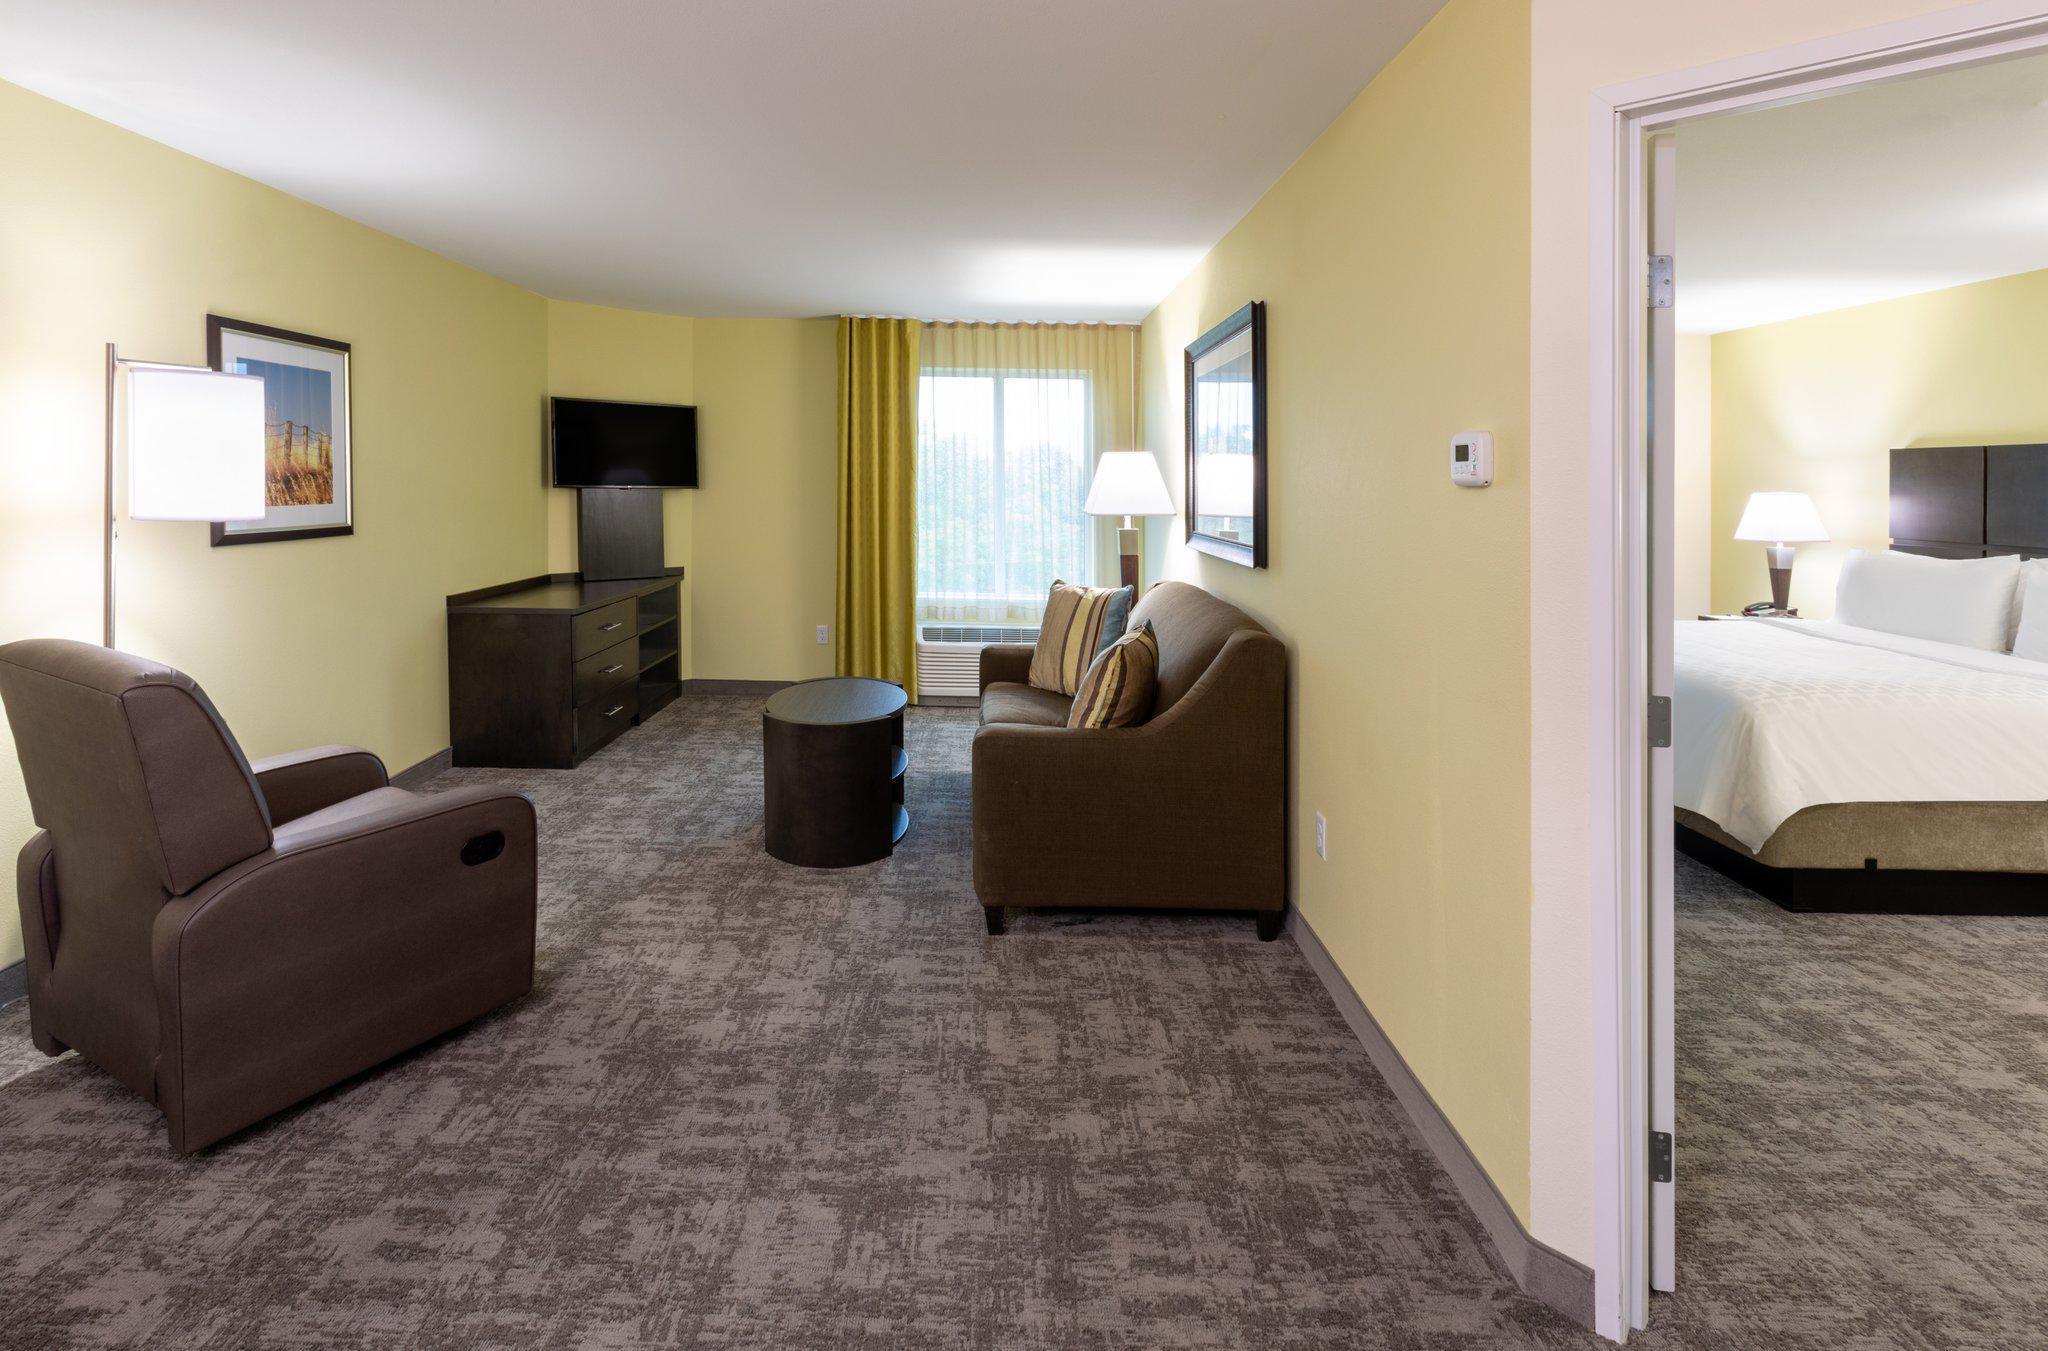 Candlewood Suites Rochester Mayo Clinic Area Photo